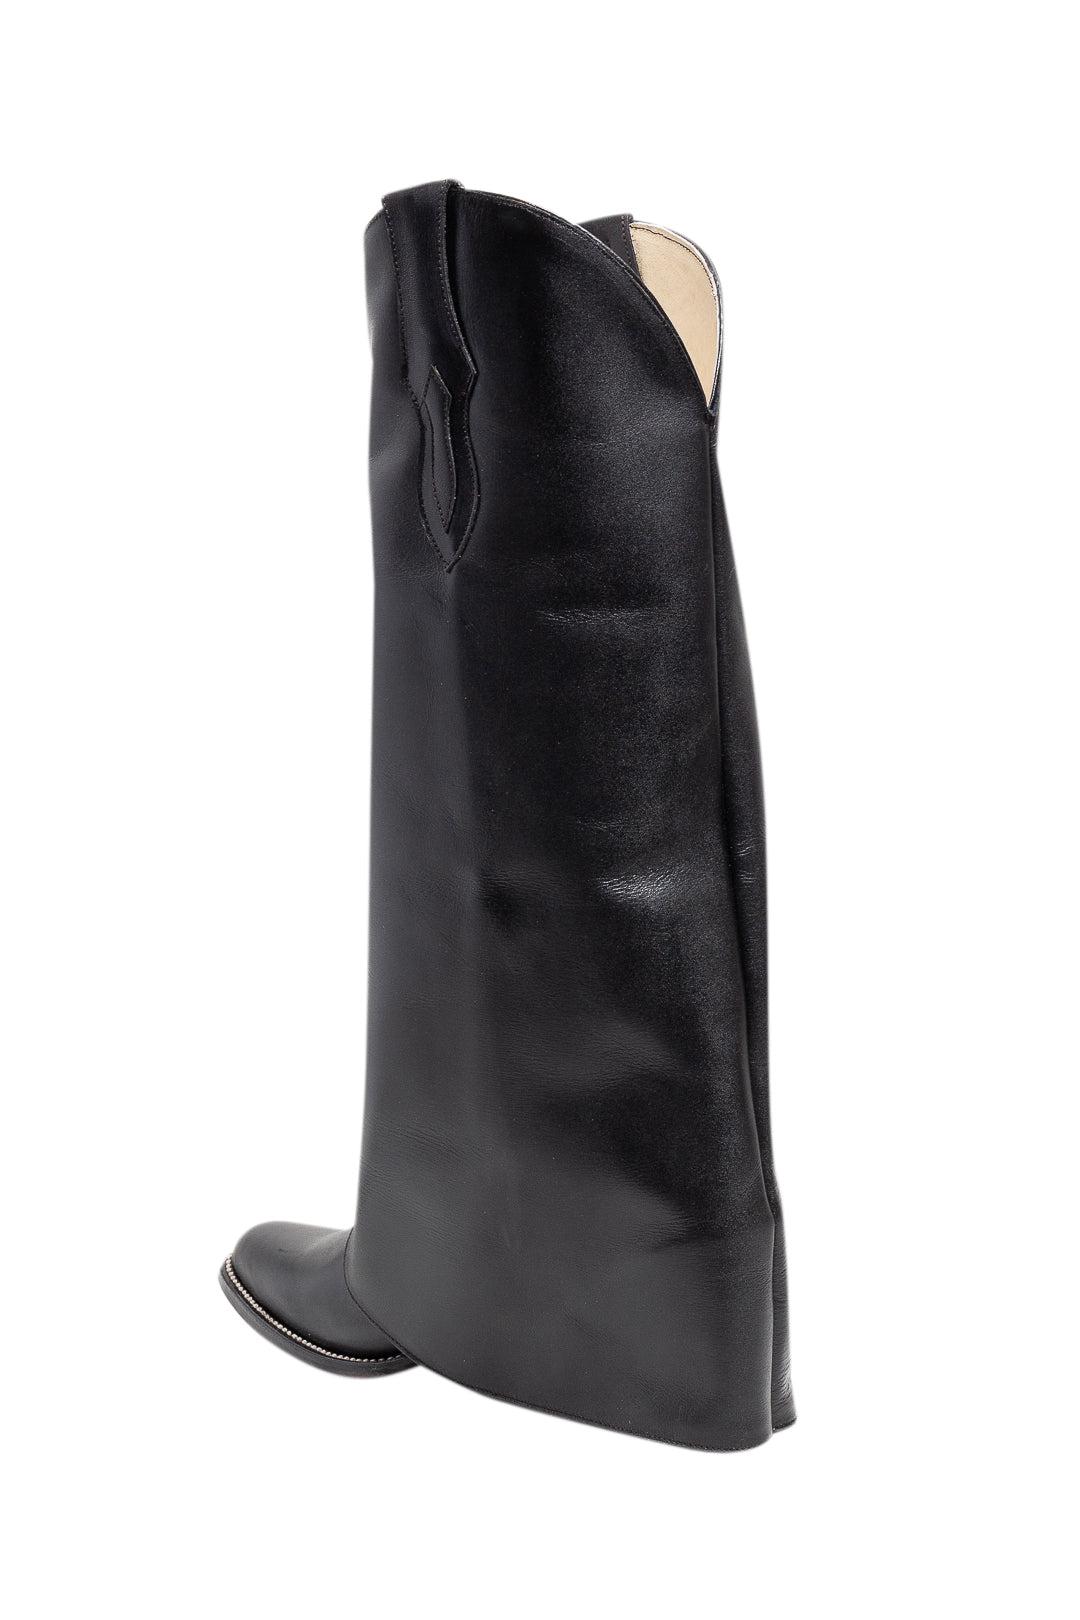 LORENA SARAVIA-Leather cowboy boots-dgallerystore